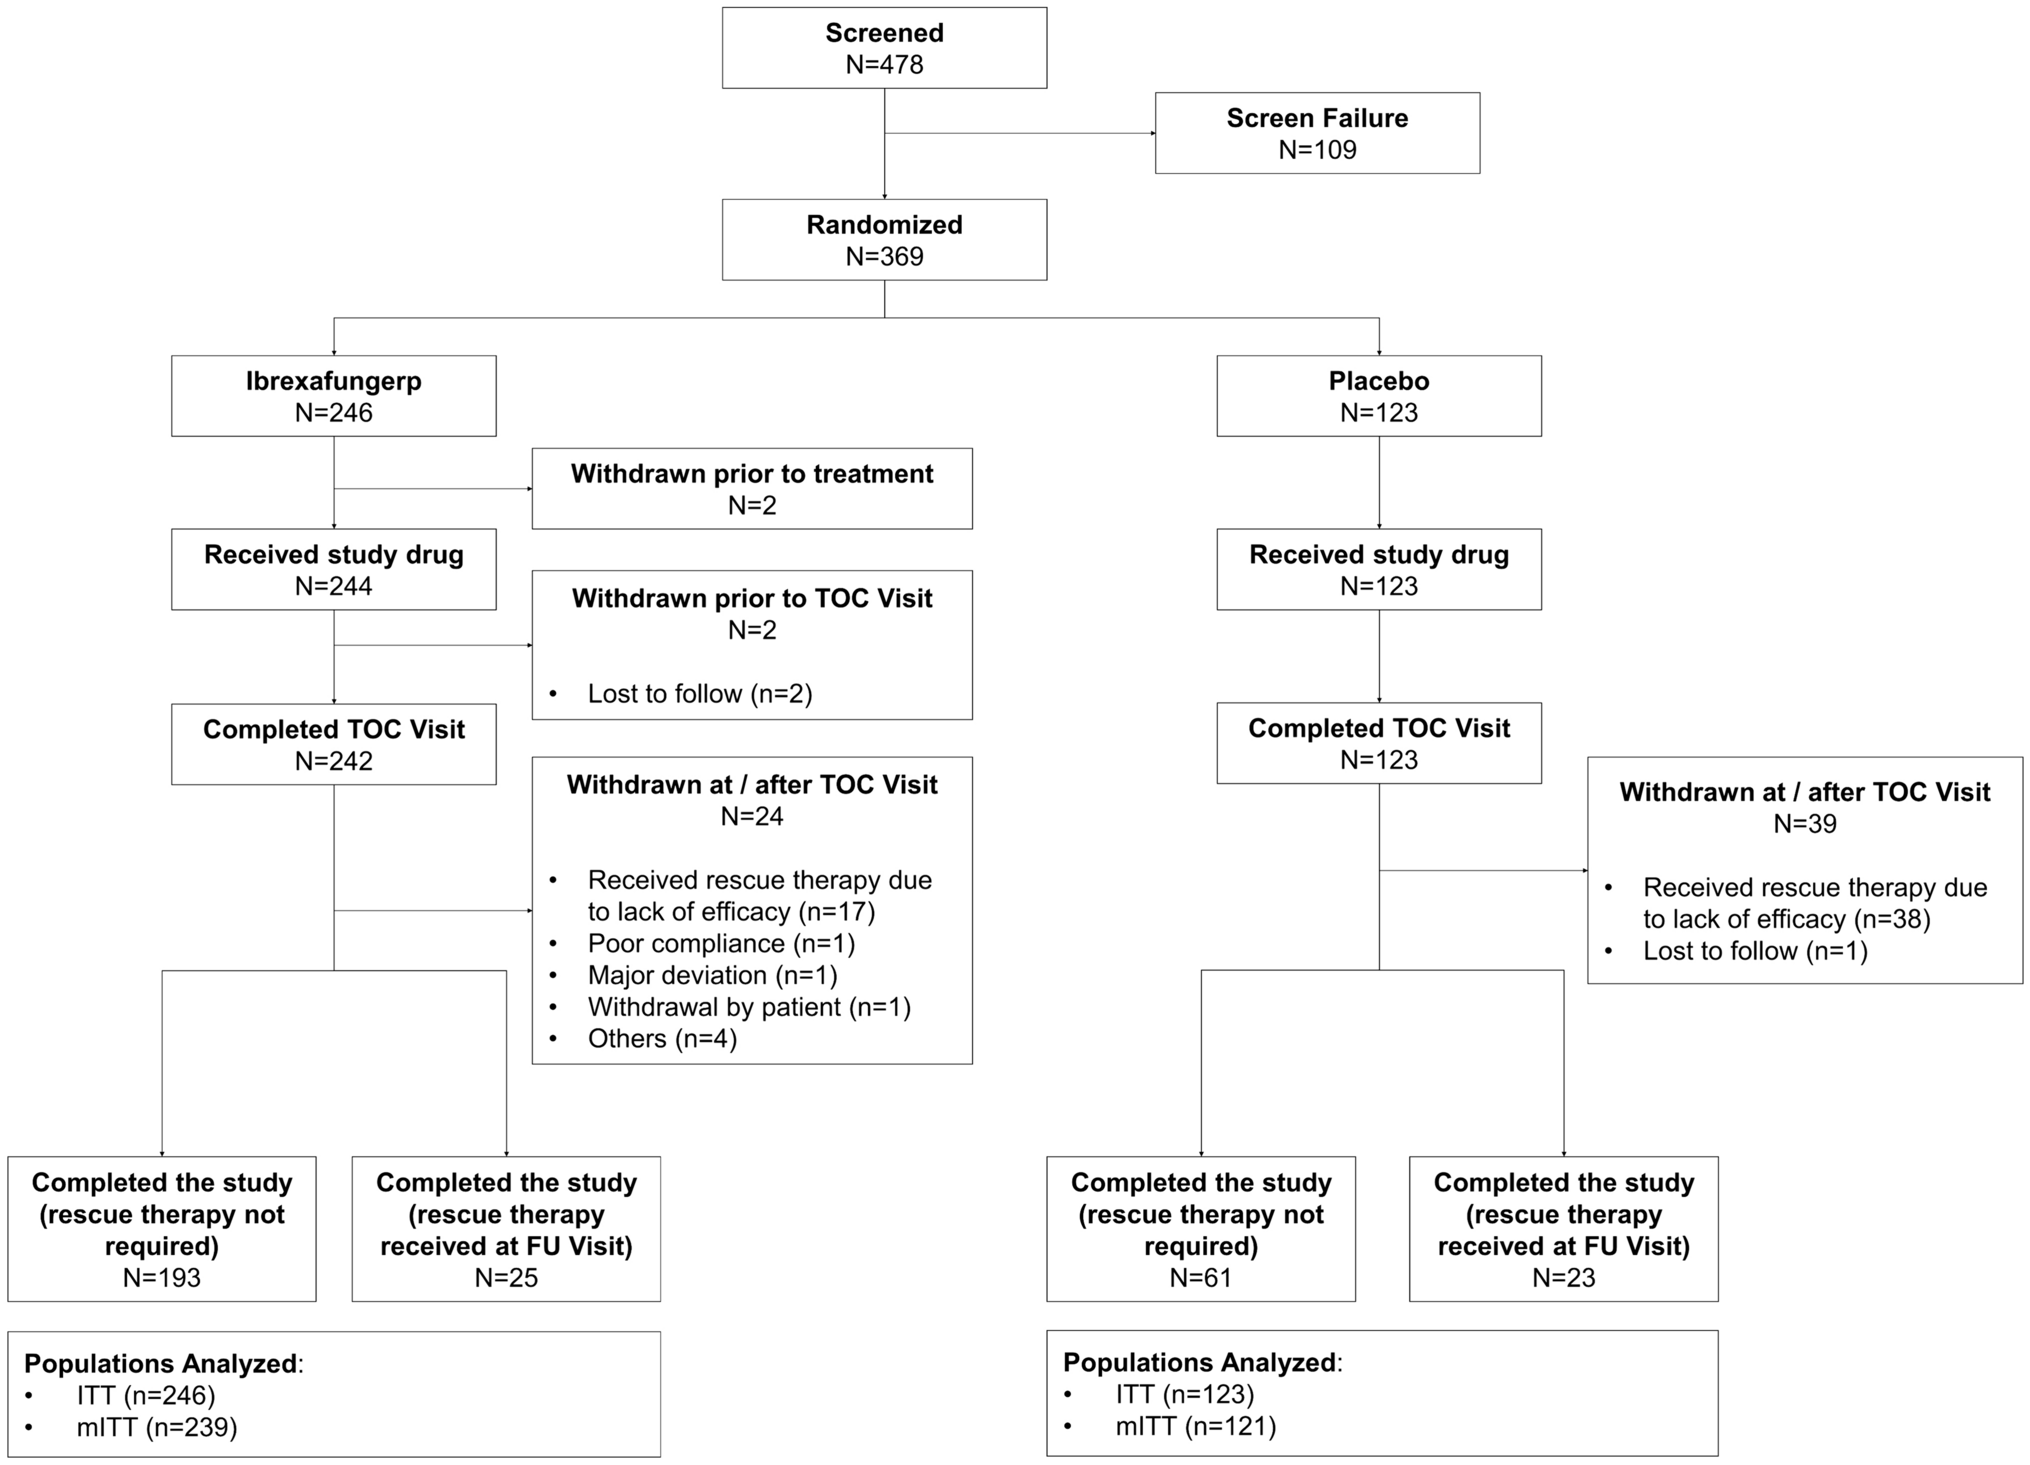 Efficacy and safety of oral ibrexafungerp in Chinese patients with vulvovaginal candidiasis: a phase III, randomized, double-blind study